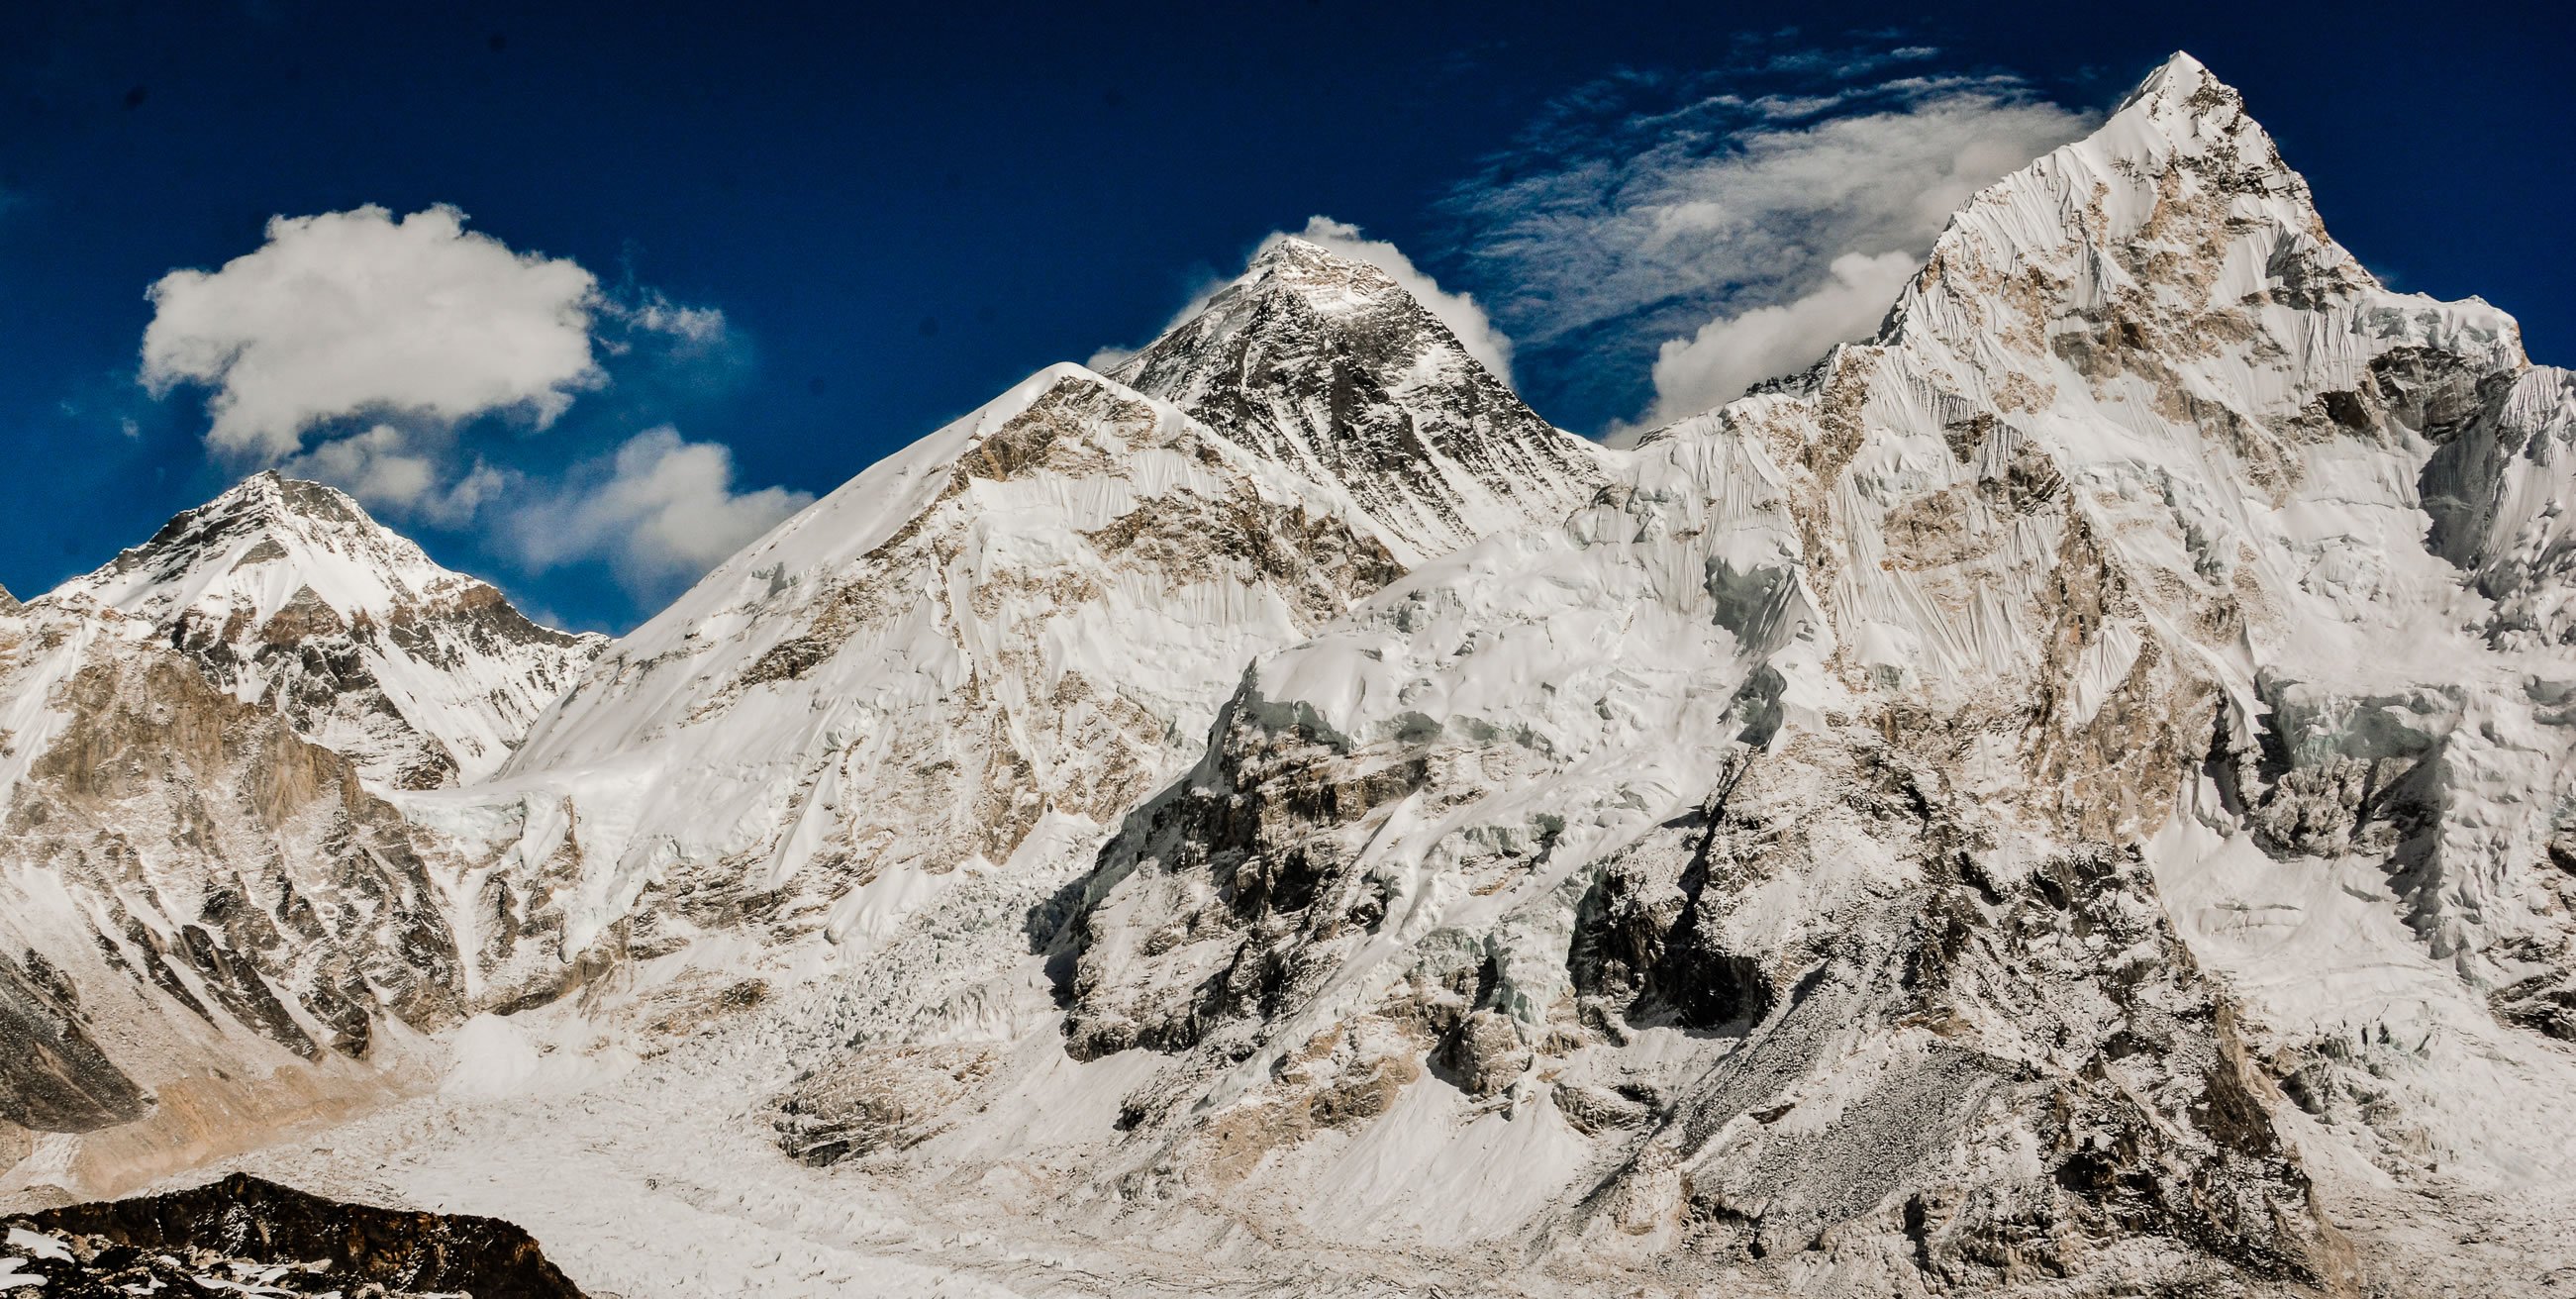 Everest View from Kalapattar